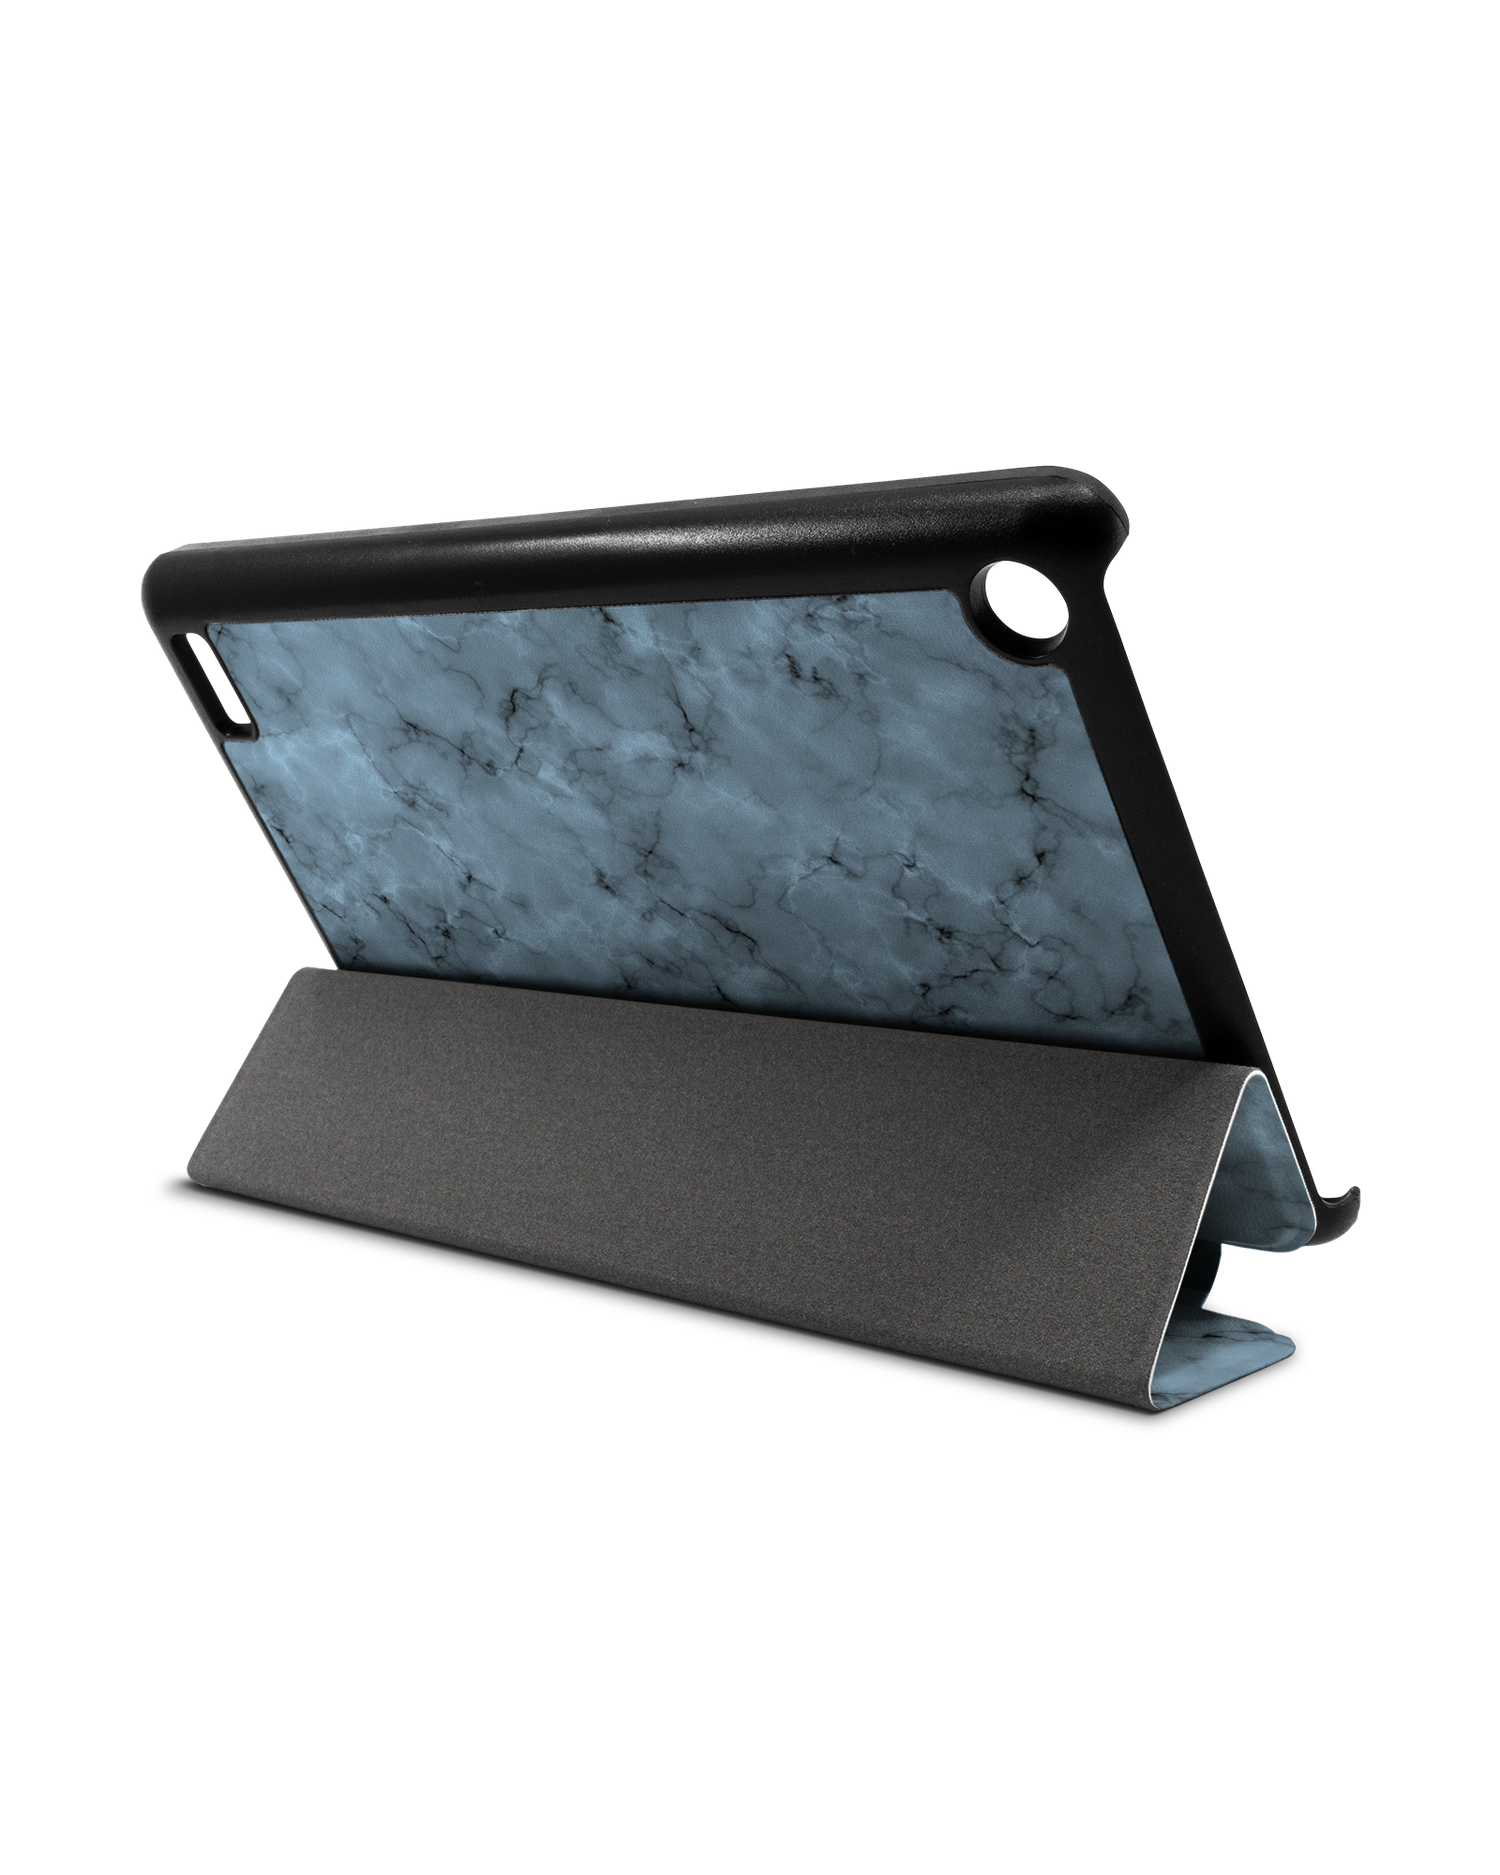 Blue Marble Tablet Smart Case for Amazon Fire 7: Used as Stand